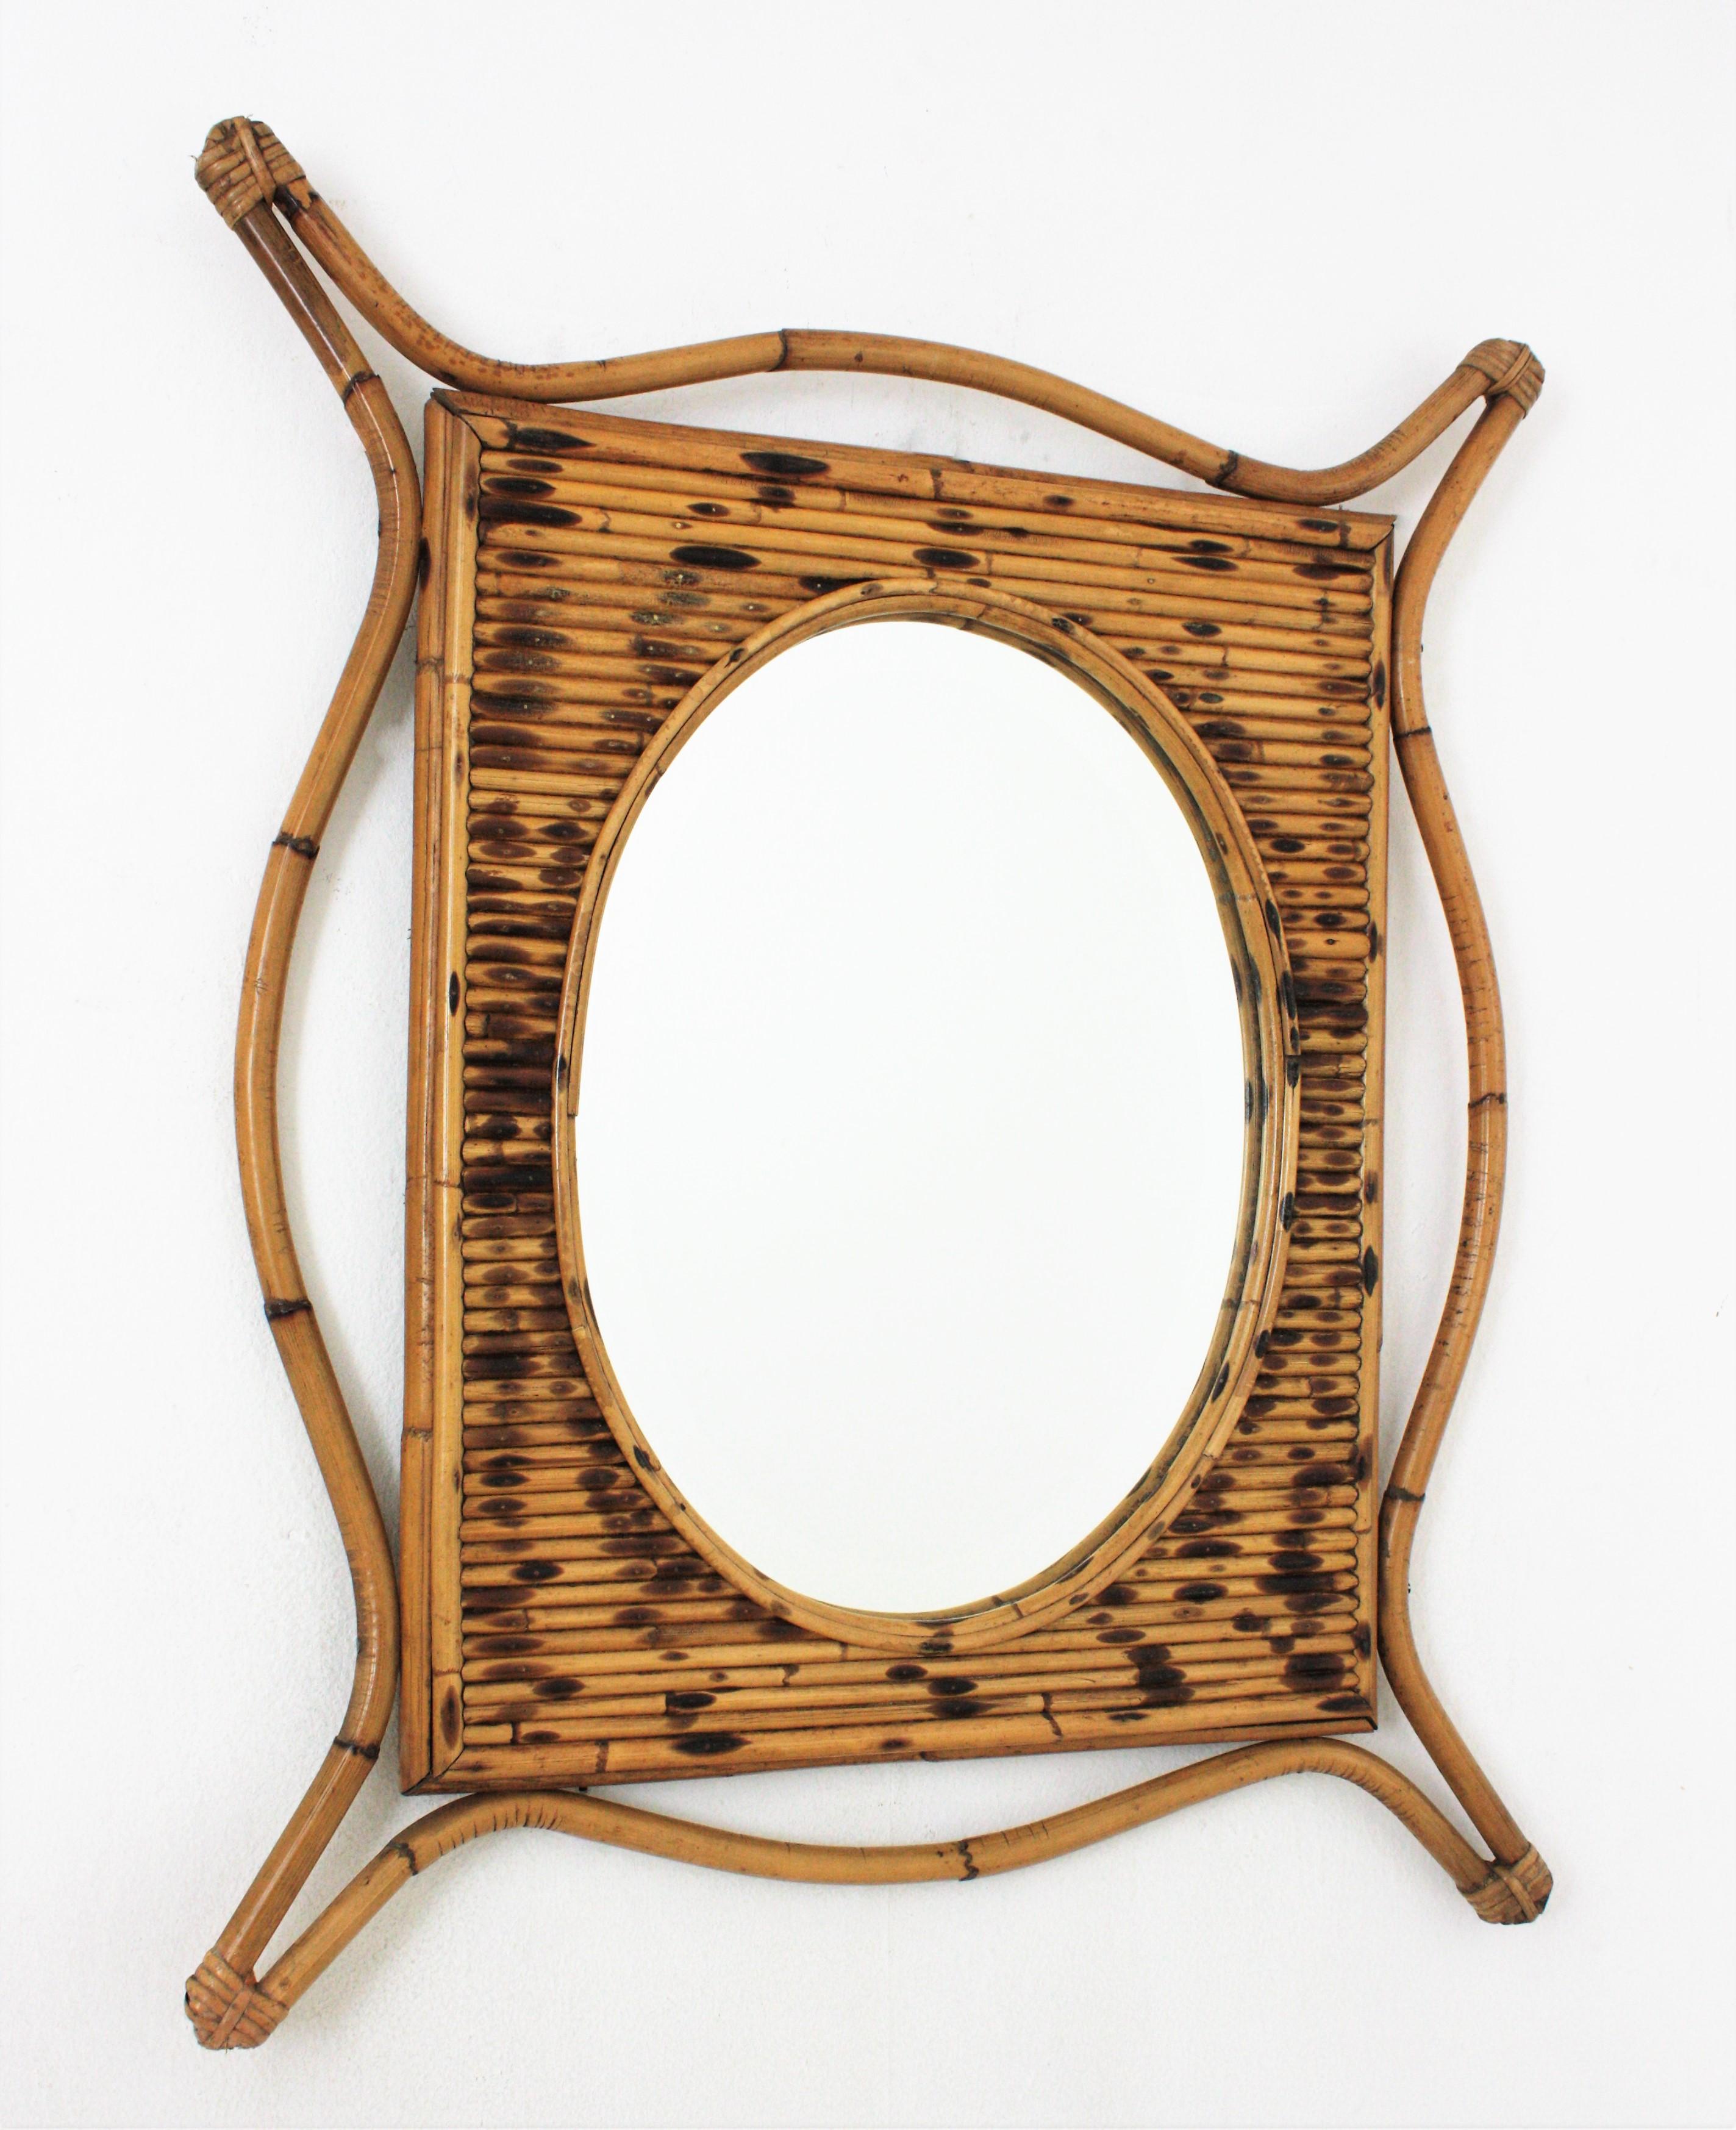 Handcrafted rattan bamboo split reed mirror. Spain, 1960s.
This mirror features a beautiful artistic frame entirely handcrafted in bamboo and rattan. The central part surrounding the oval mirror features a split reed frame with pyrography details.